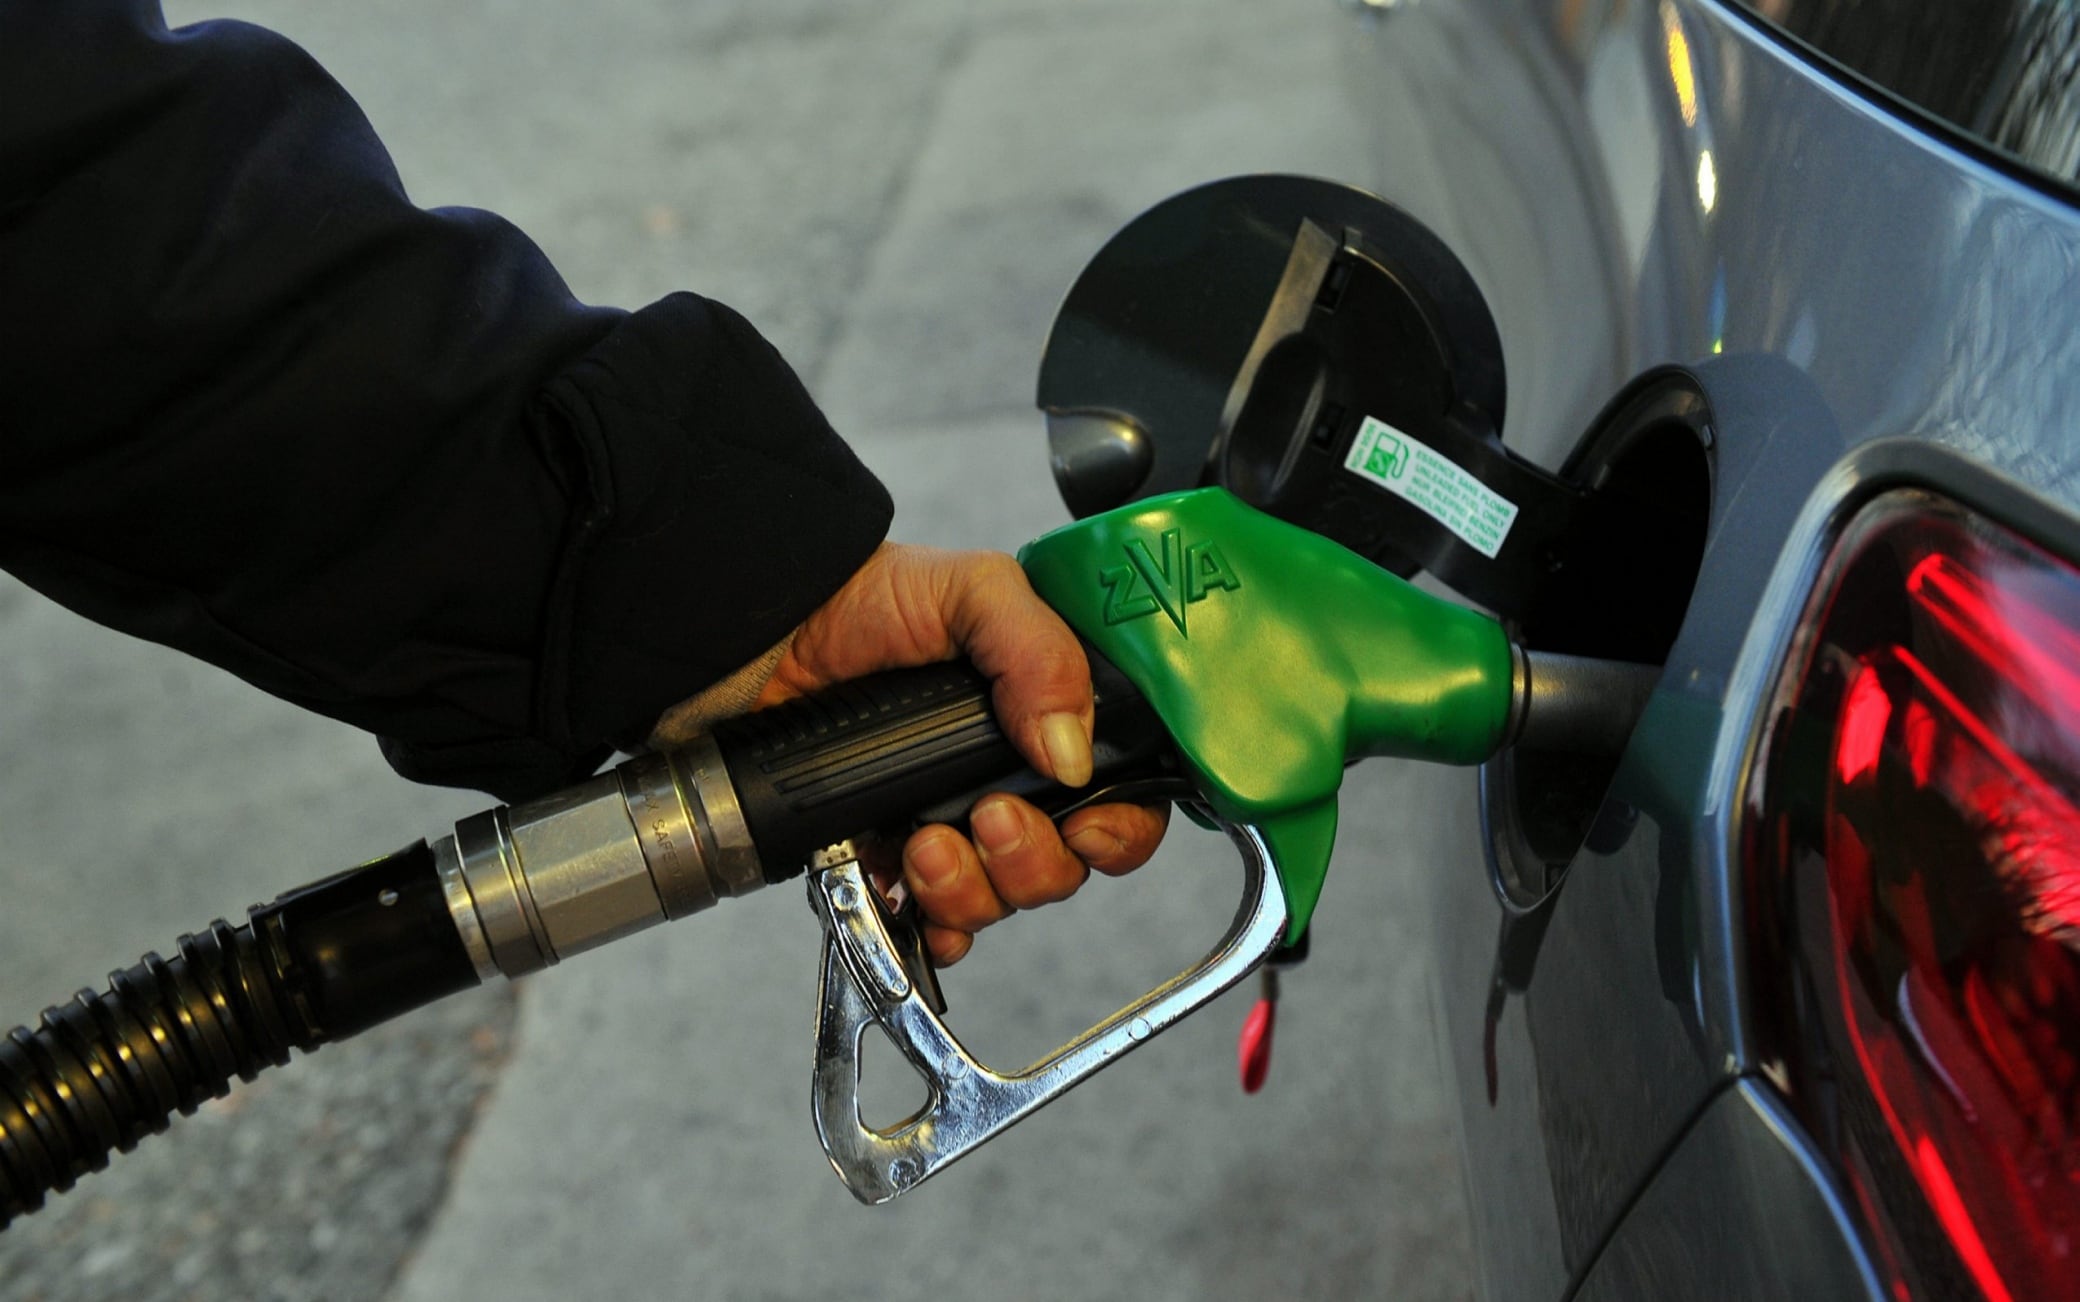 Fuel prices, 2022 begins to rise